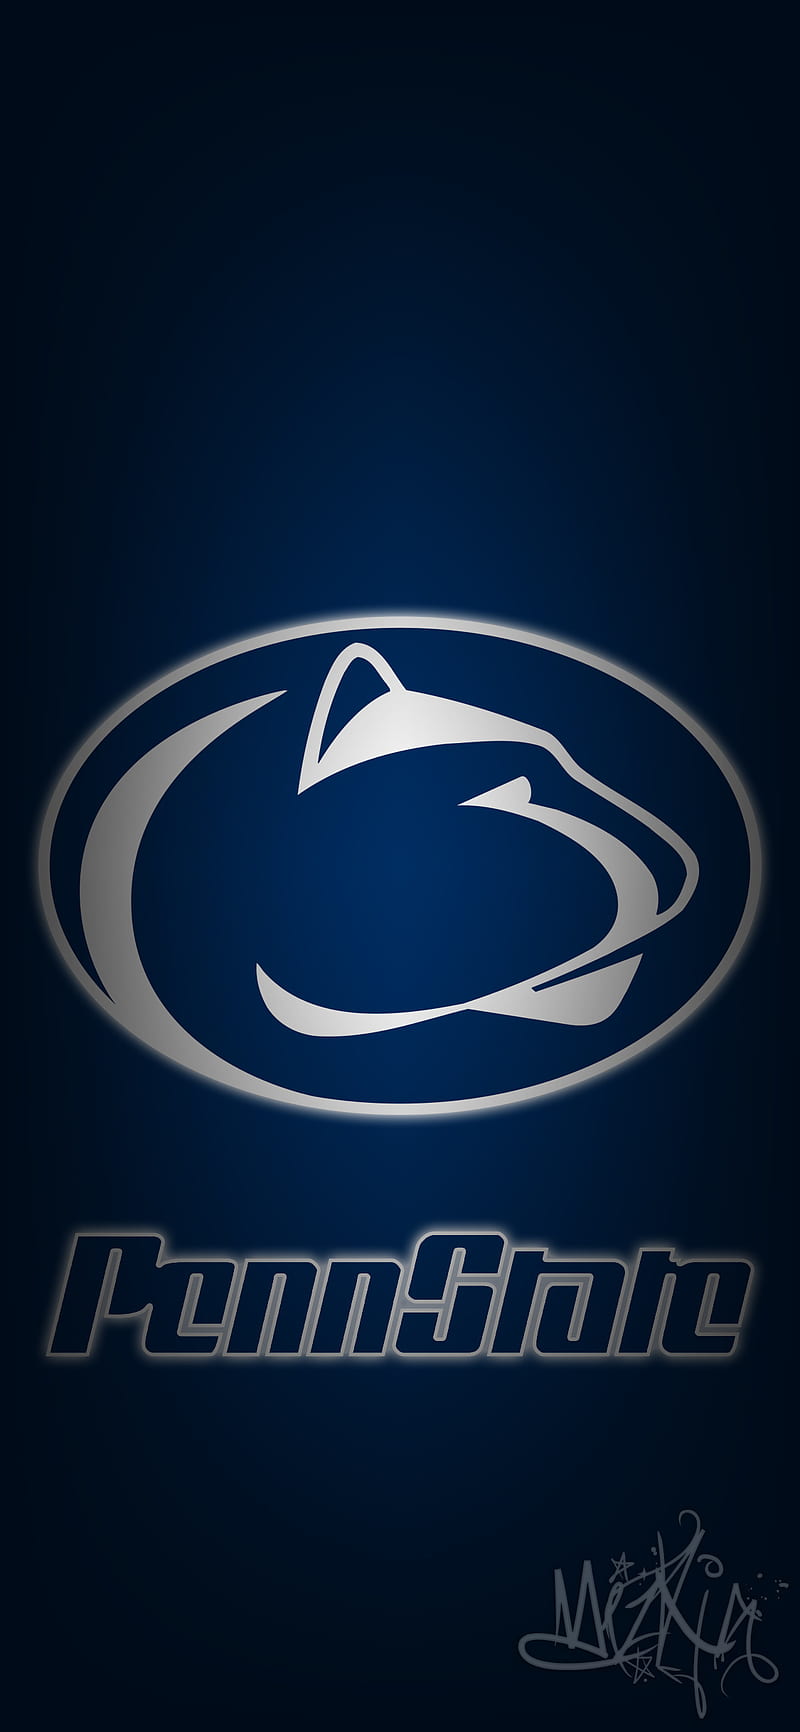 Penn State iPhone Wallpaper (49+ images)